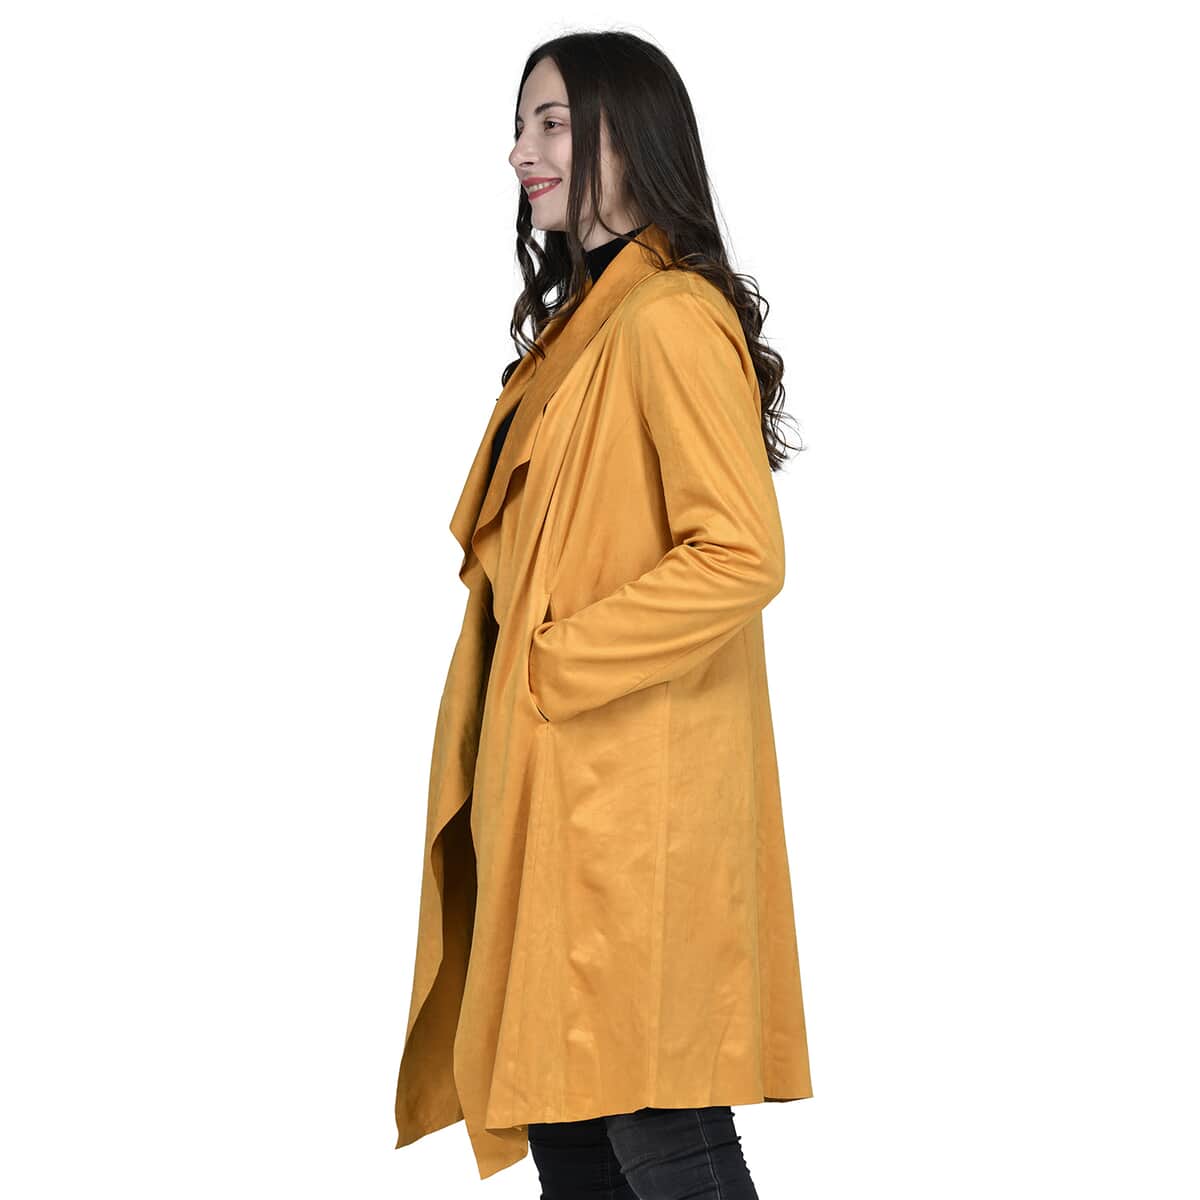 Passage Gold Faux Suede Long Waterfall Open Front Jacket For Ladies -L, Jacket for Women, Long Coat Jacket for Women, Womens Coats image number 2